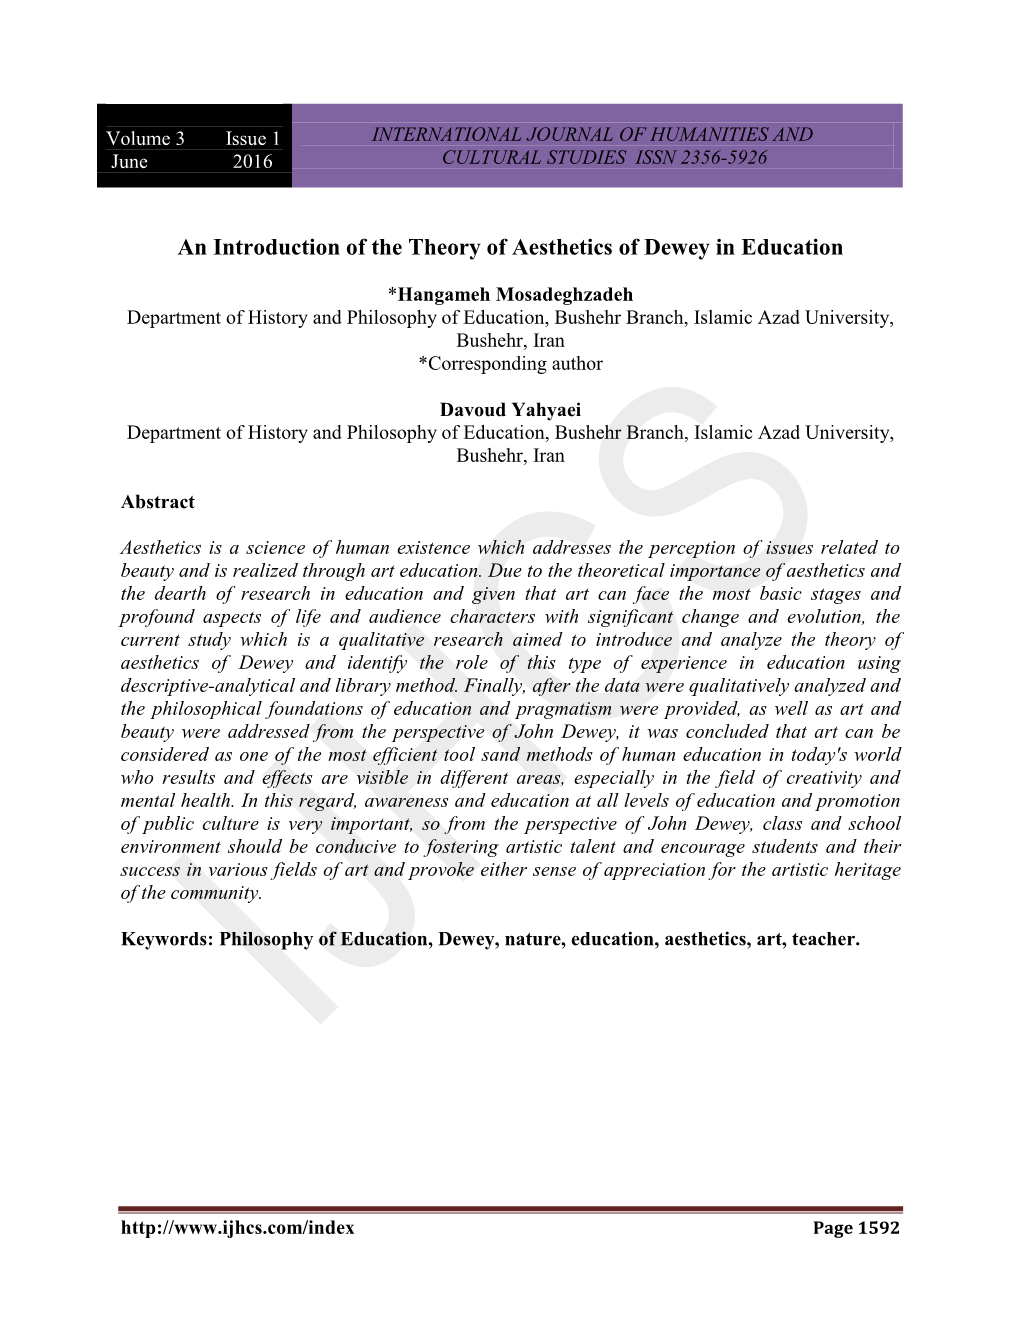 An Introduction of the Theory of Aesthetics of Dewey in Education